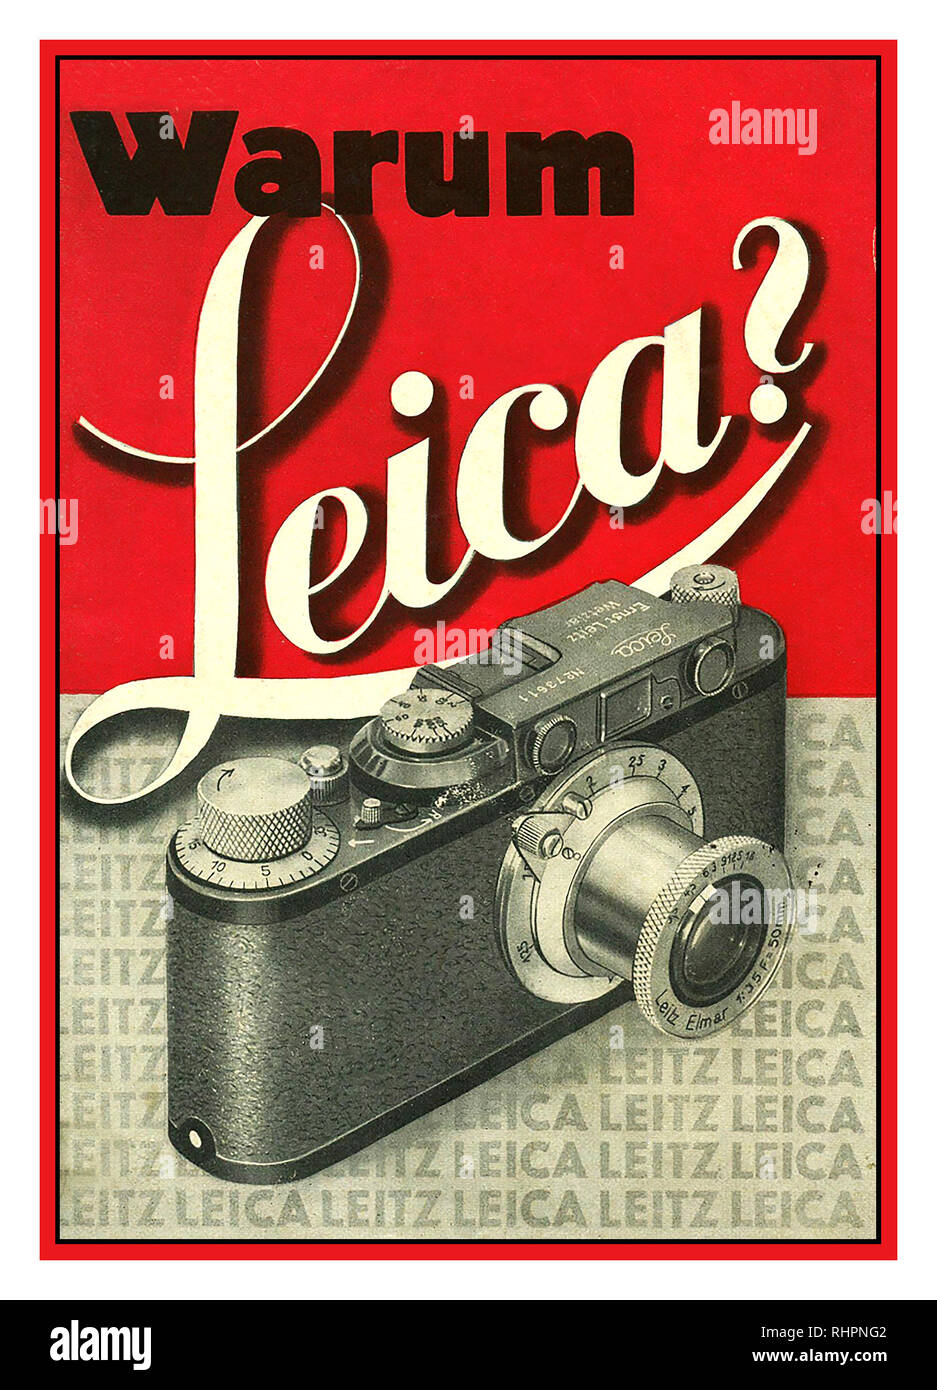 LEICA CAMERA LEITZ VINTAGE Advertising 1930’s ‘Warum Leica?’ “Why Leica?”Sales Cover Page, Black Body Leica II D 1932. Renowned 35mm camera manufactured by the Leitz Company Germany Stock Photo